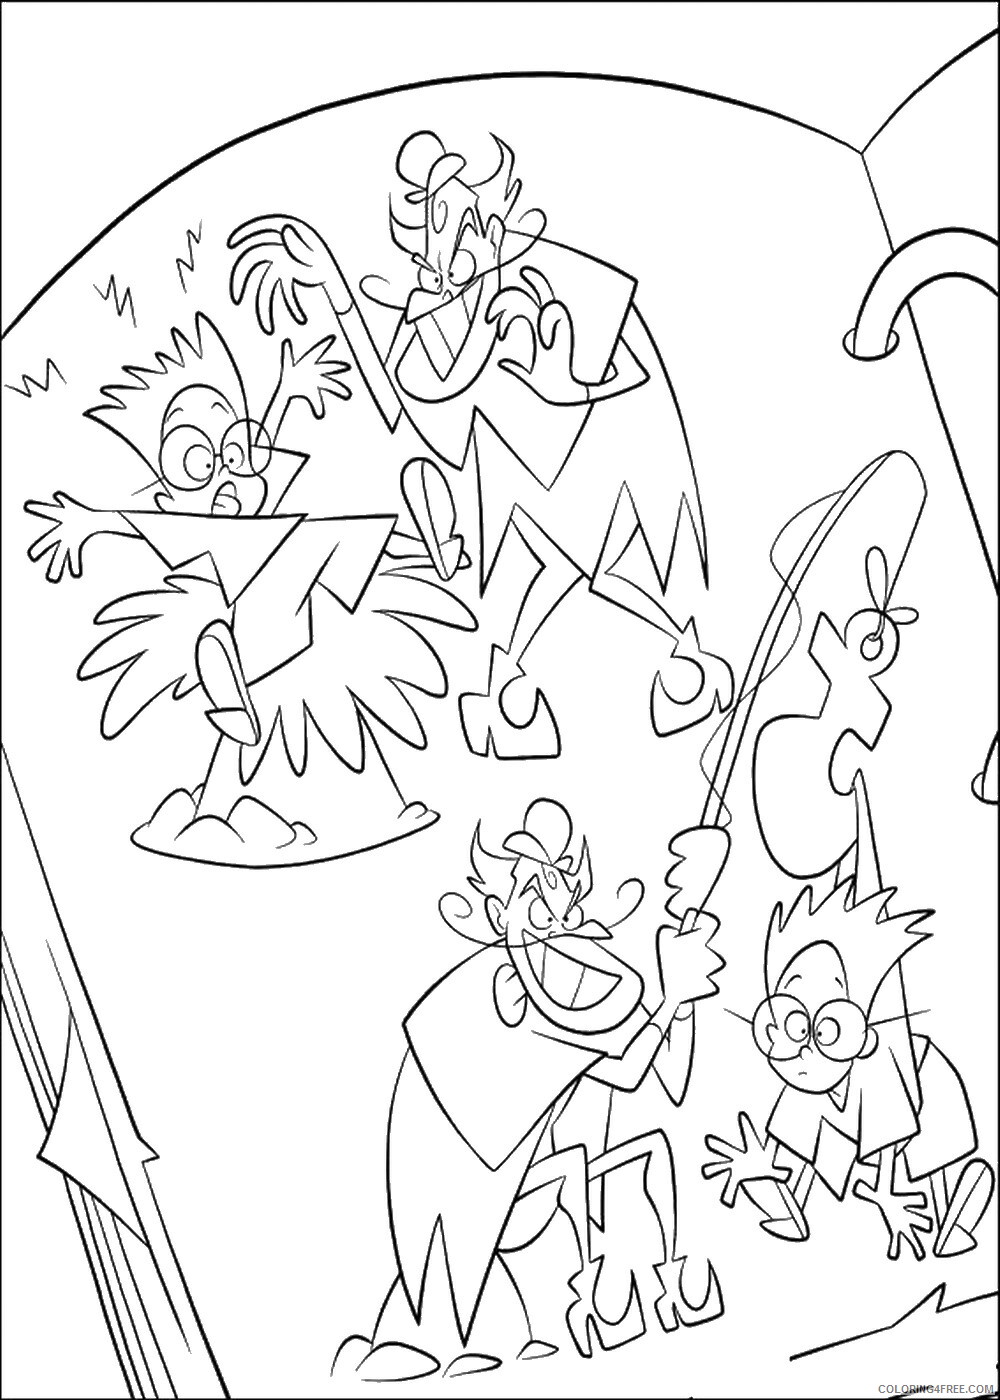 Meet the Robinsons Coloring Pages TV Film Printable 2020 04978 Coloring4free